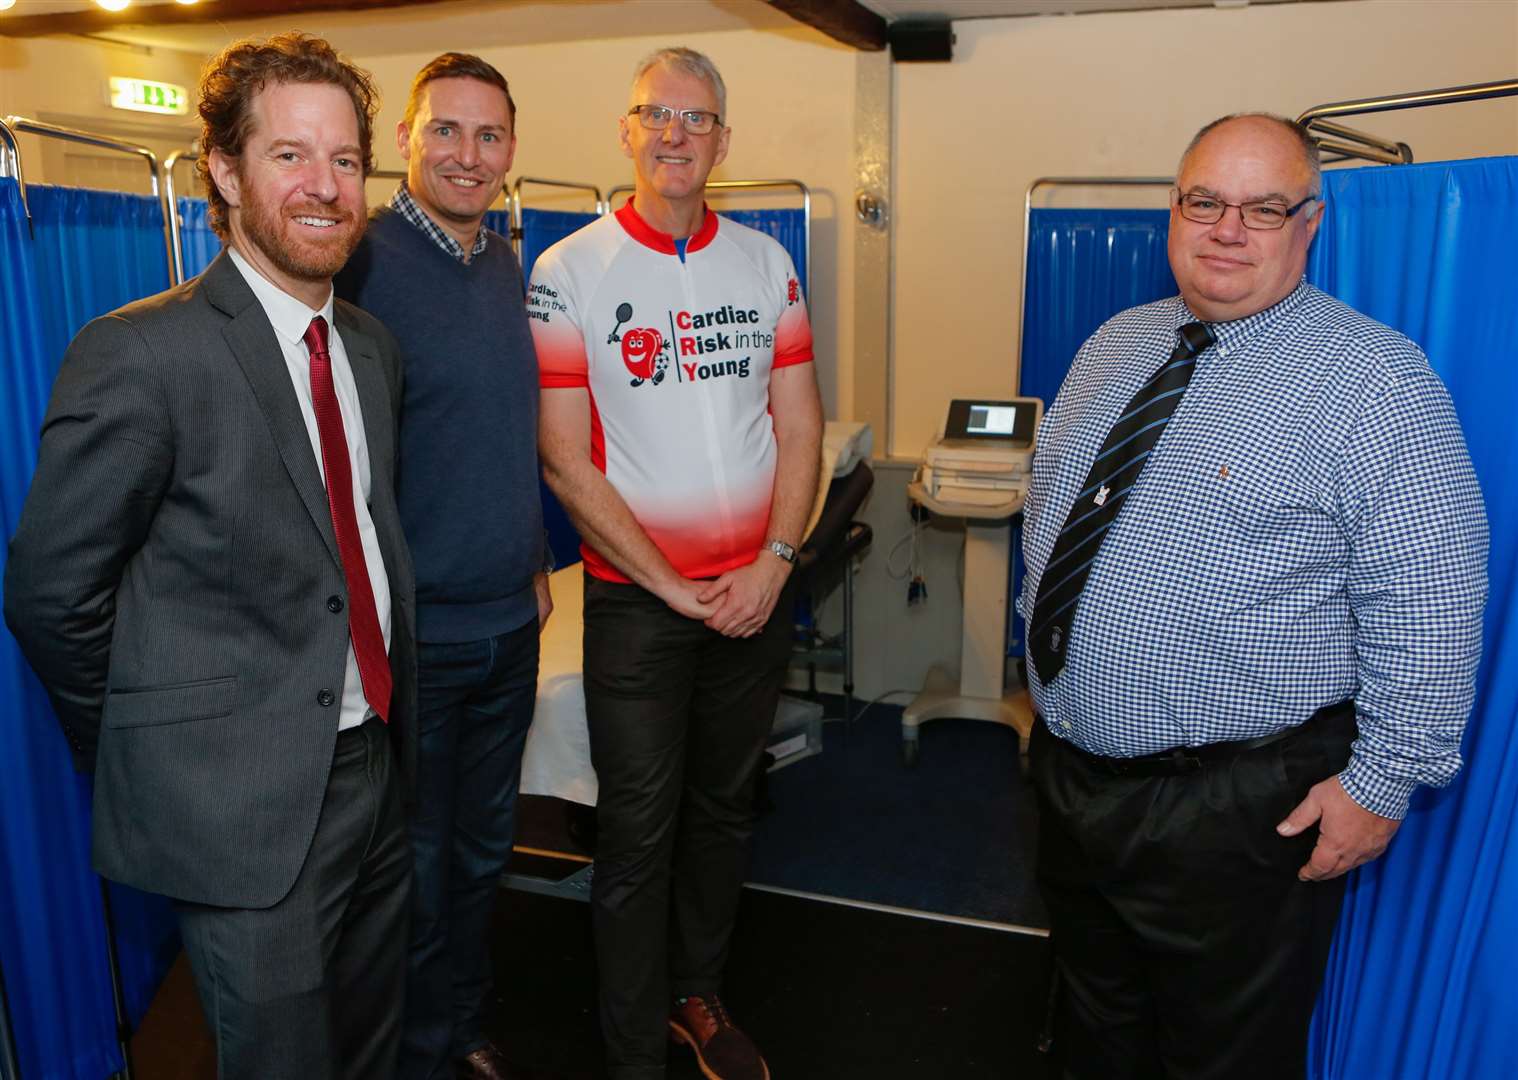 From left to right, Steve Cox, chief exe of CRY, Andy Scott, a CRY patron, Roger Maddams, and Steve Churcher, then-chairman of Tonbridge Angels. Picture: Matthew Walker